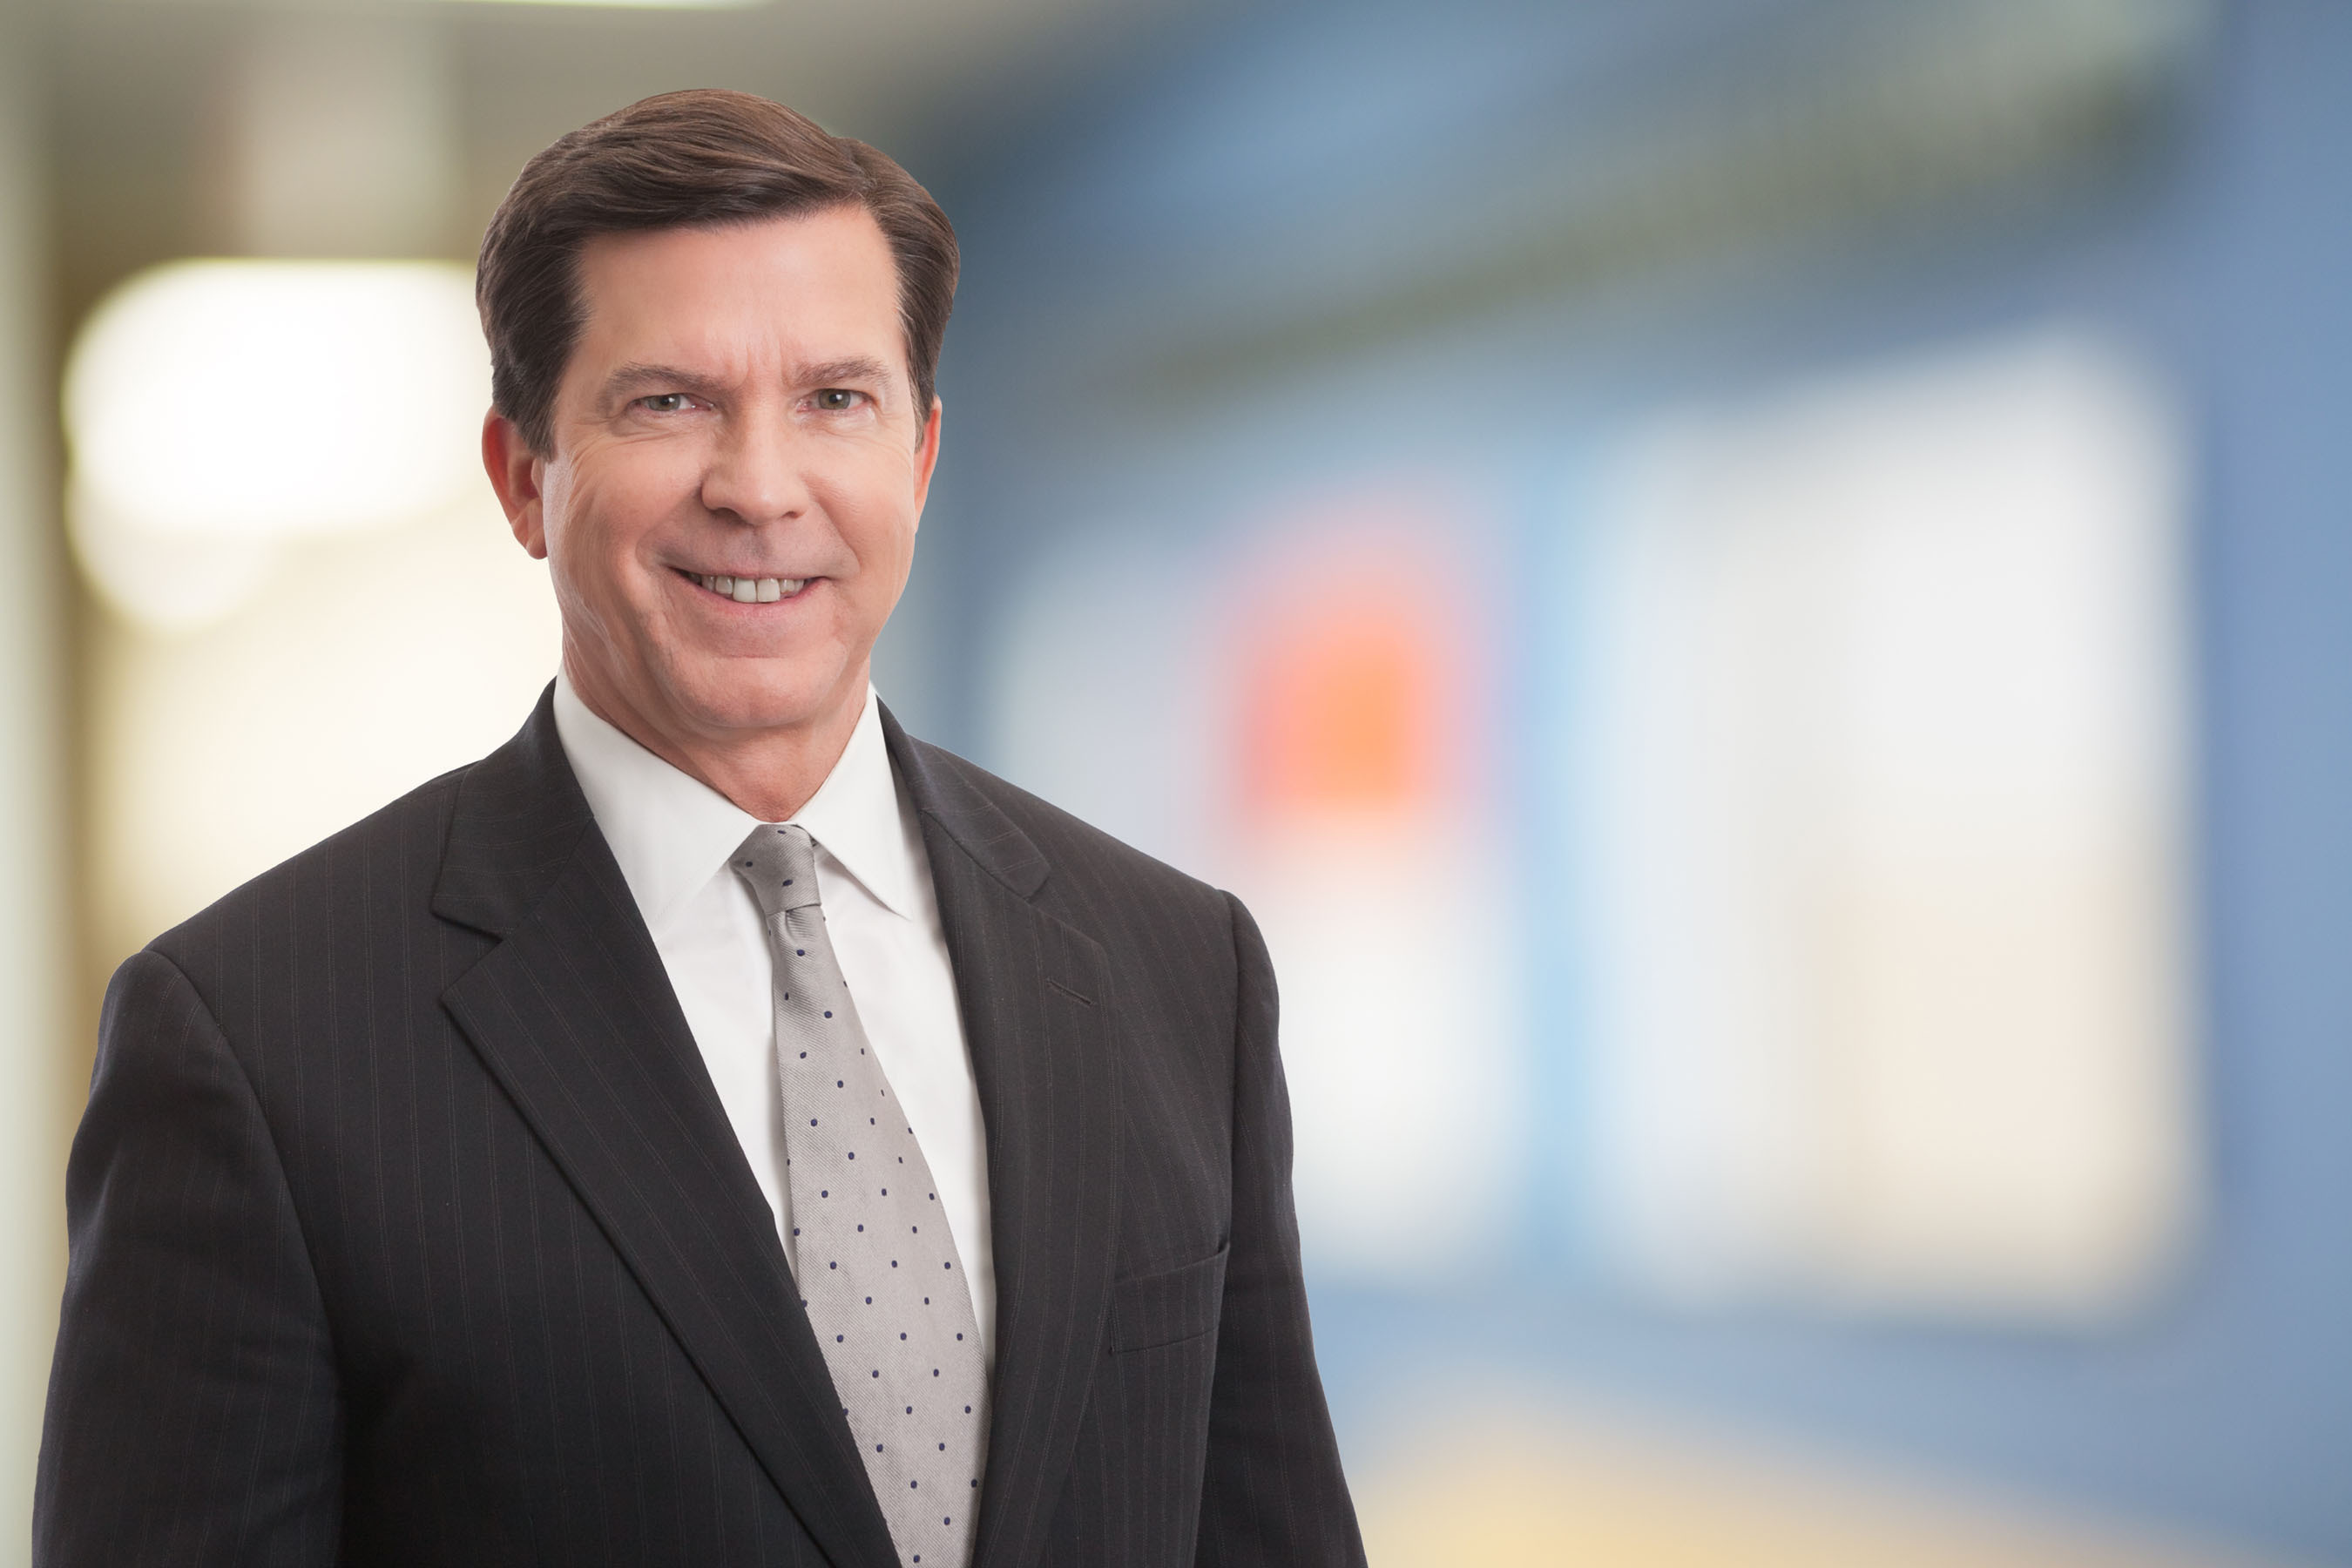 L. Craig Dowdy named senior vice president, external affairs, corporate communications and marketing for The Laclede Group, Inc. (NYSE: LG). (PRNewsFoto/The Laclede Group, Inc.) (PRNewsFoto/THE LACLEDE GROUP, INC.)